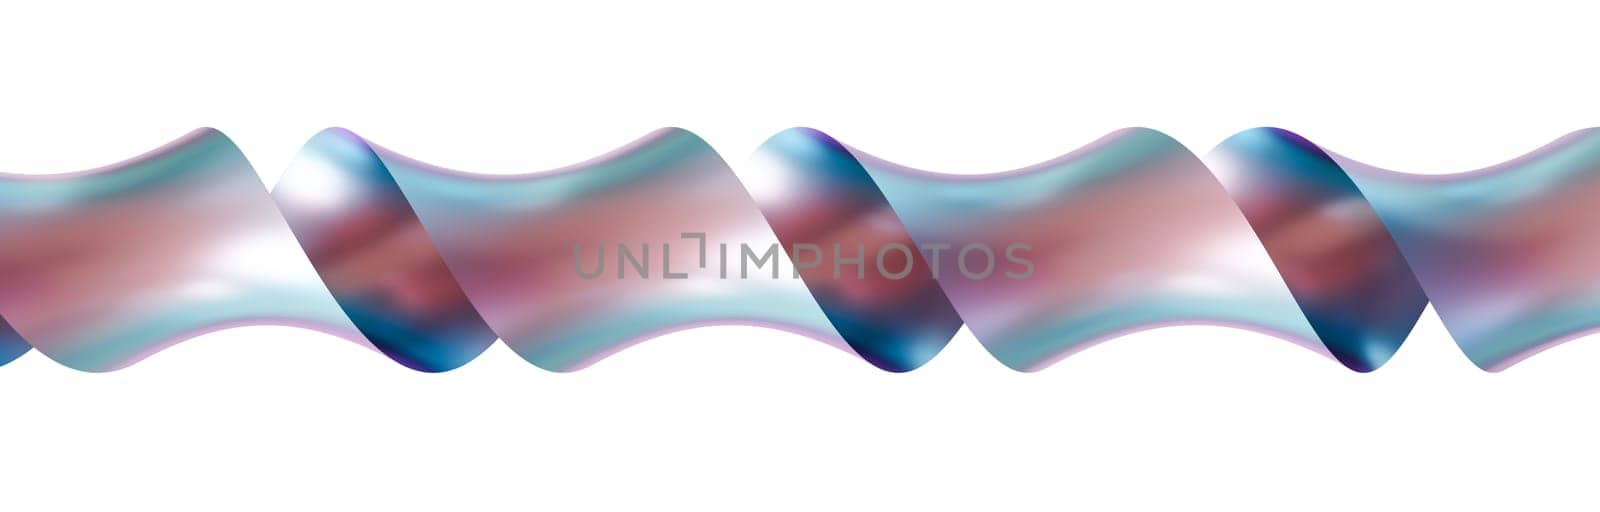 Holographic 3D ribbon isolated on white background. Metallic, iridescent band. Color gradient, y2k style. Cut out trendy and futuristic design element. 3D rendering. by creativebird